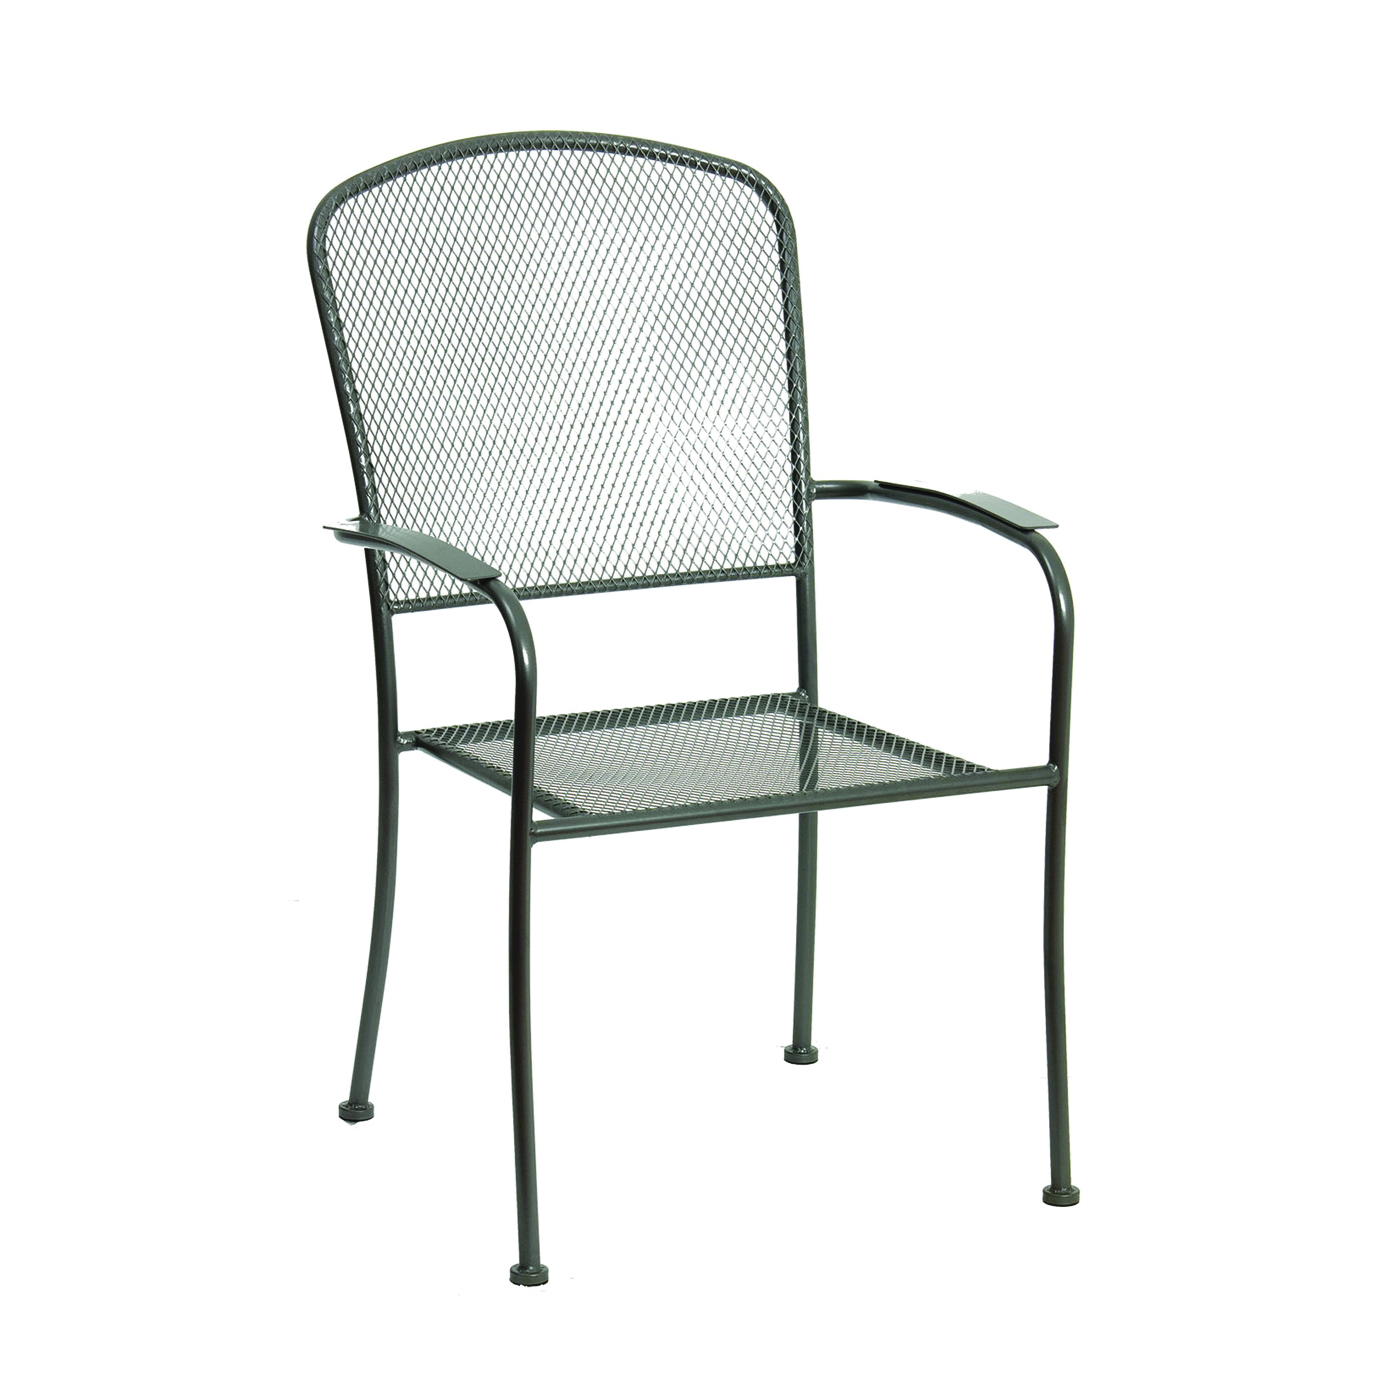 Arlington JYL-2077C Stackable Patio Chair with Mesh, 24 in W, 24-1/2 in D, 36-5/8 in H, Steel Seat, Black